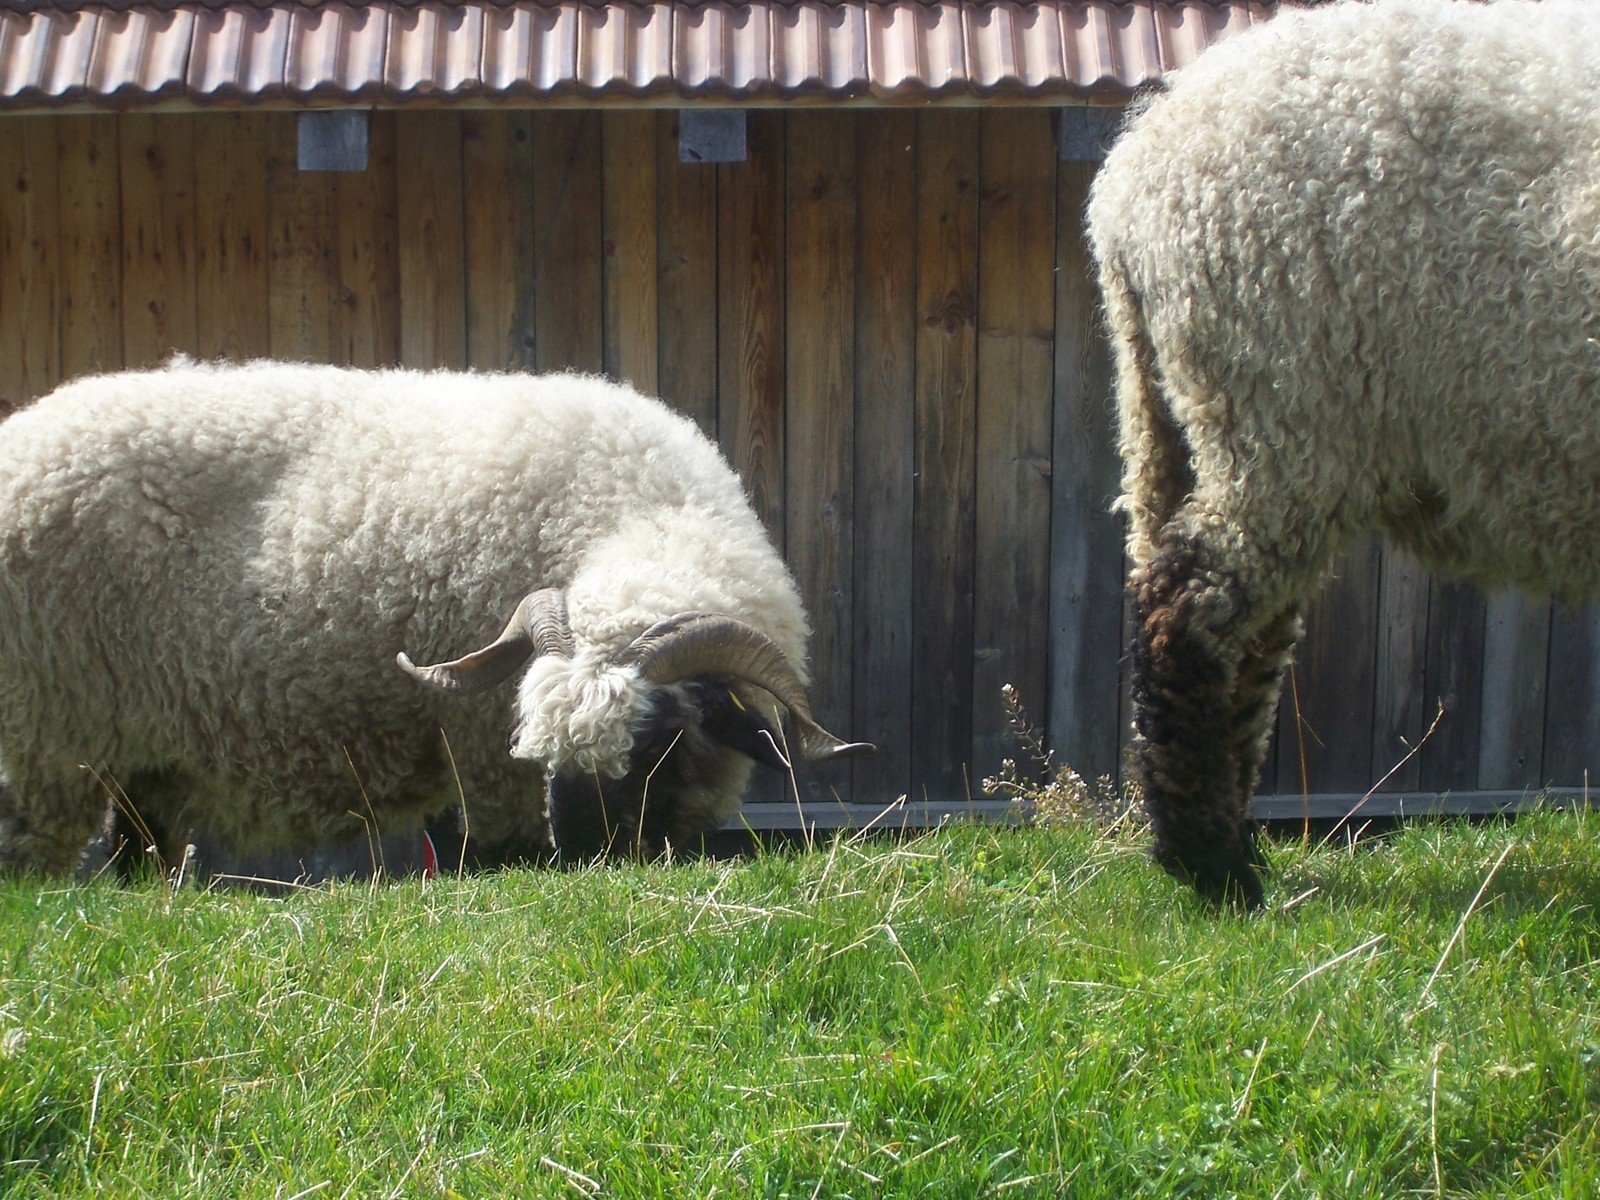 two sheep grazing on some green grass near a wooden fence